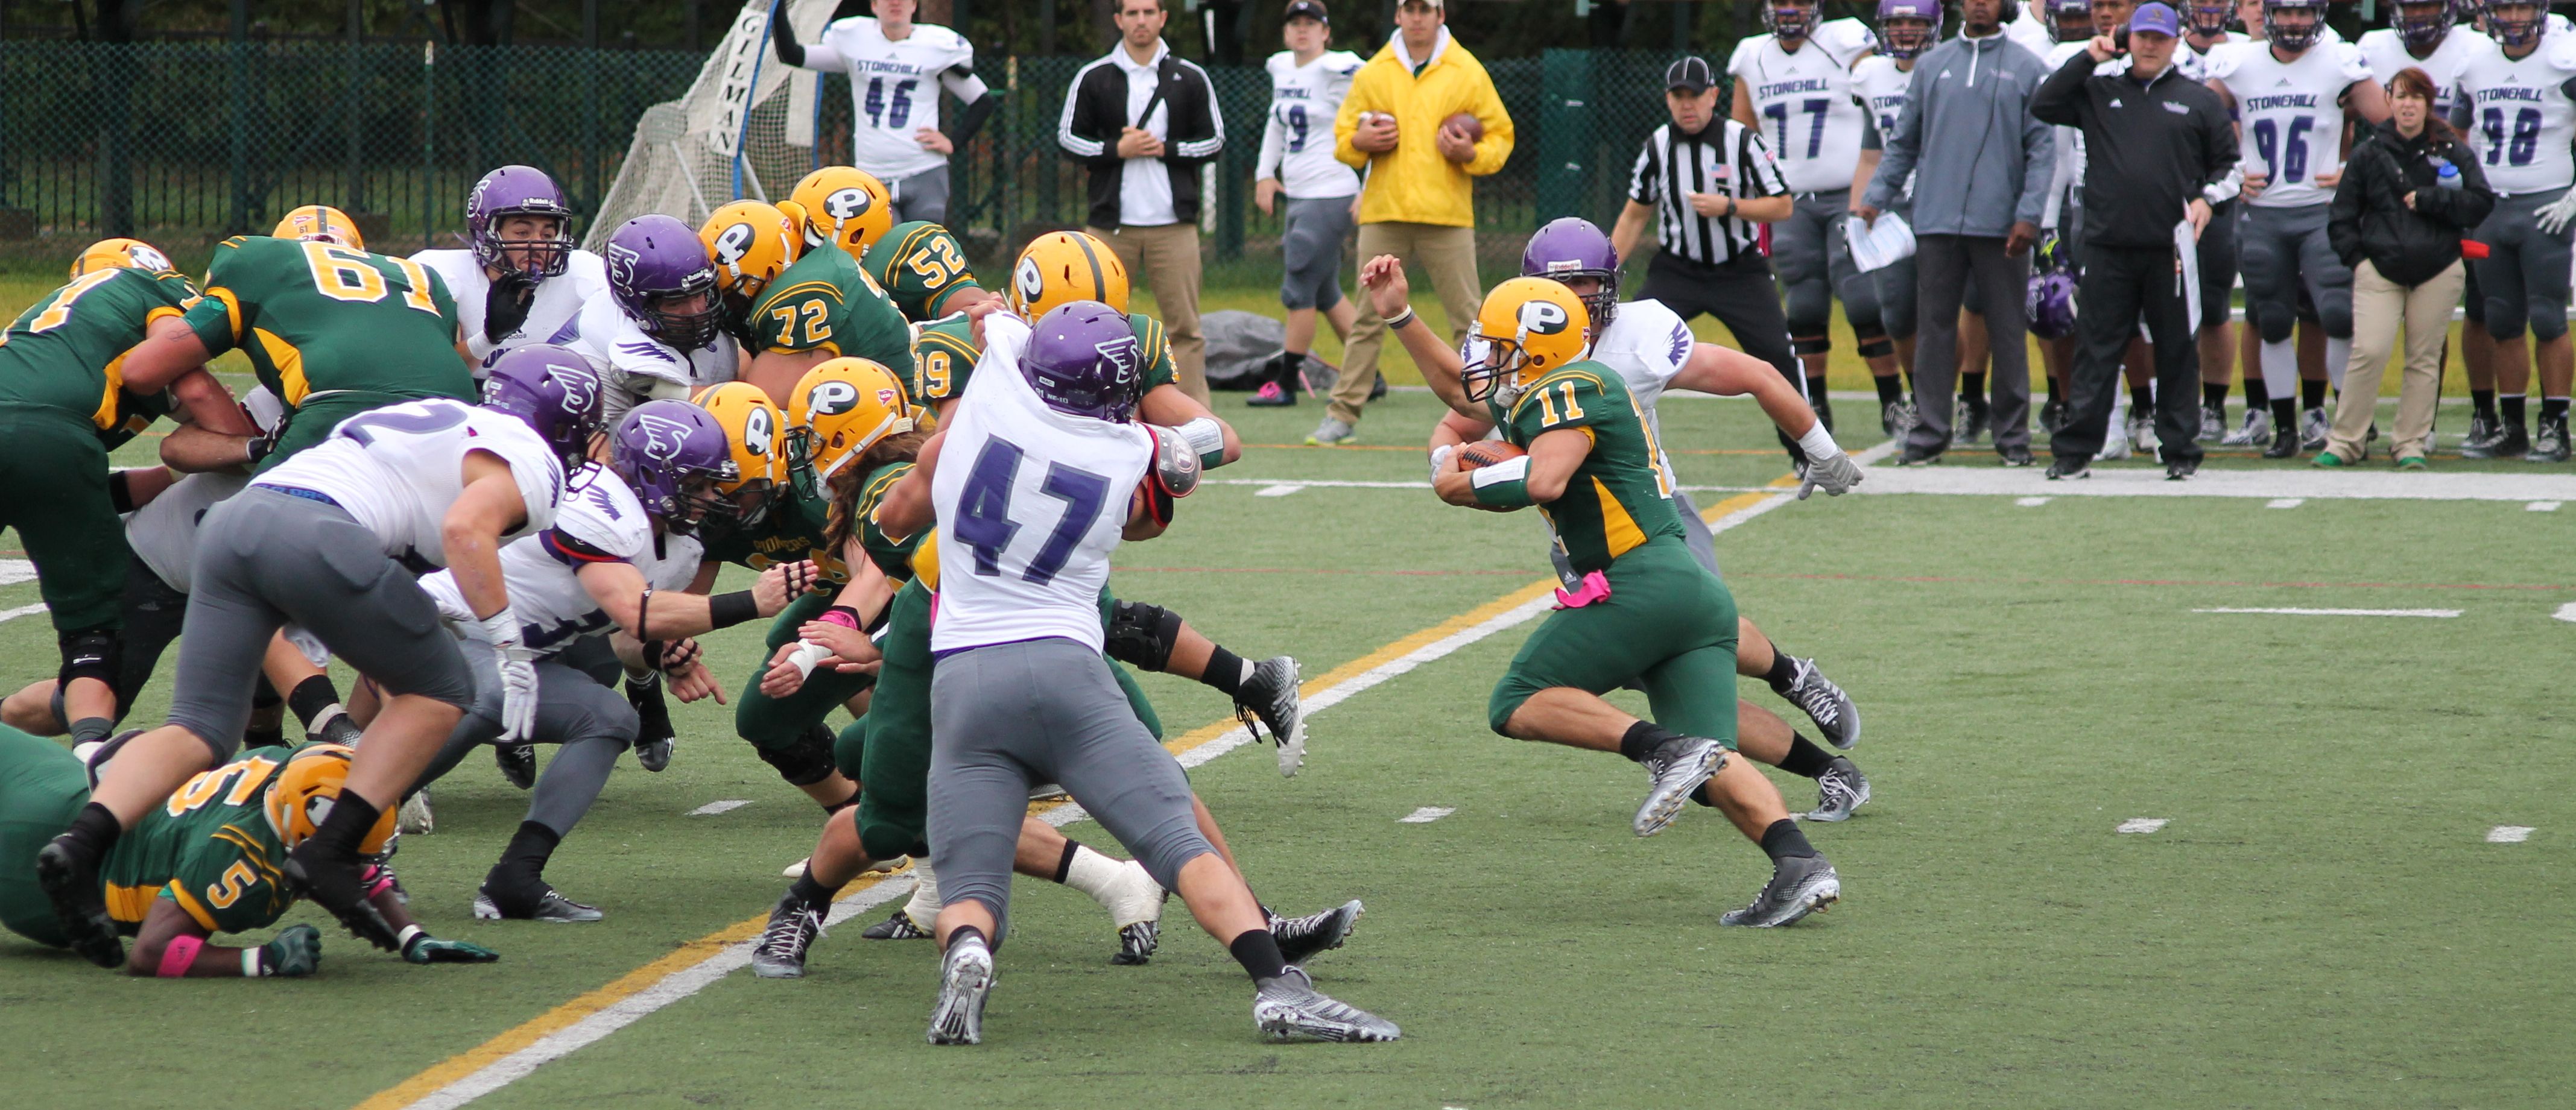 #11 Steven Laurino plunges into the Stonehill defense